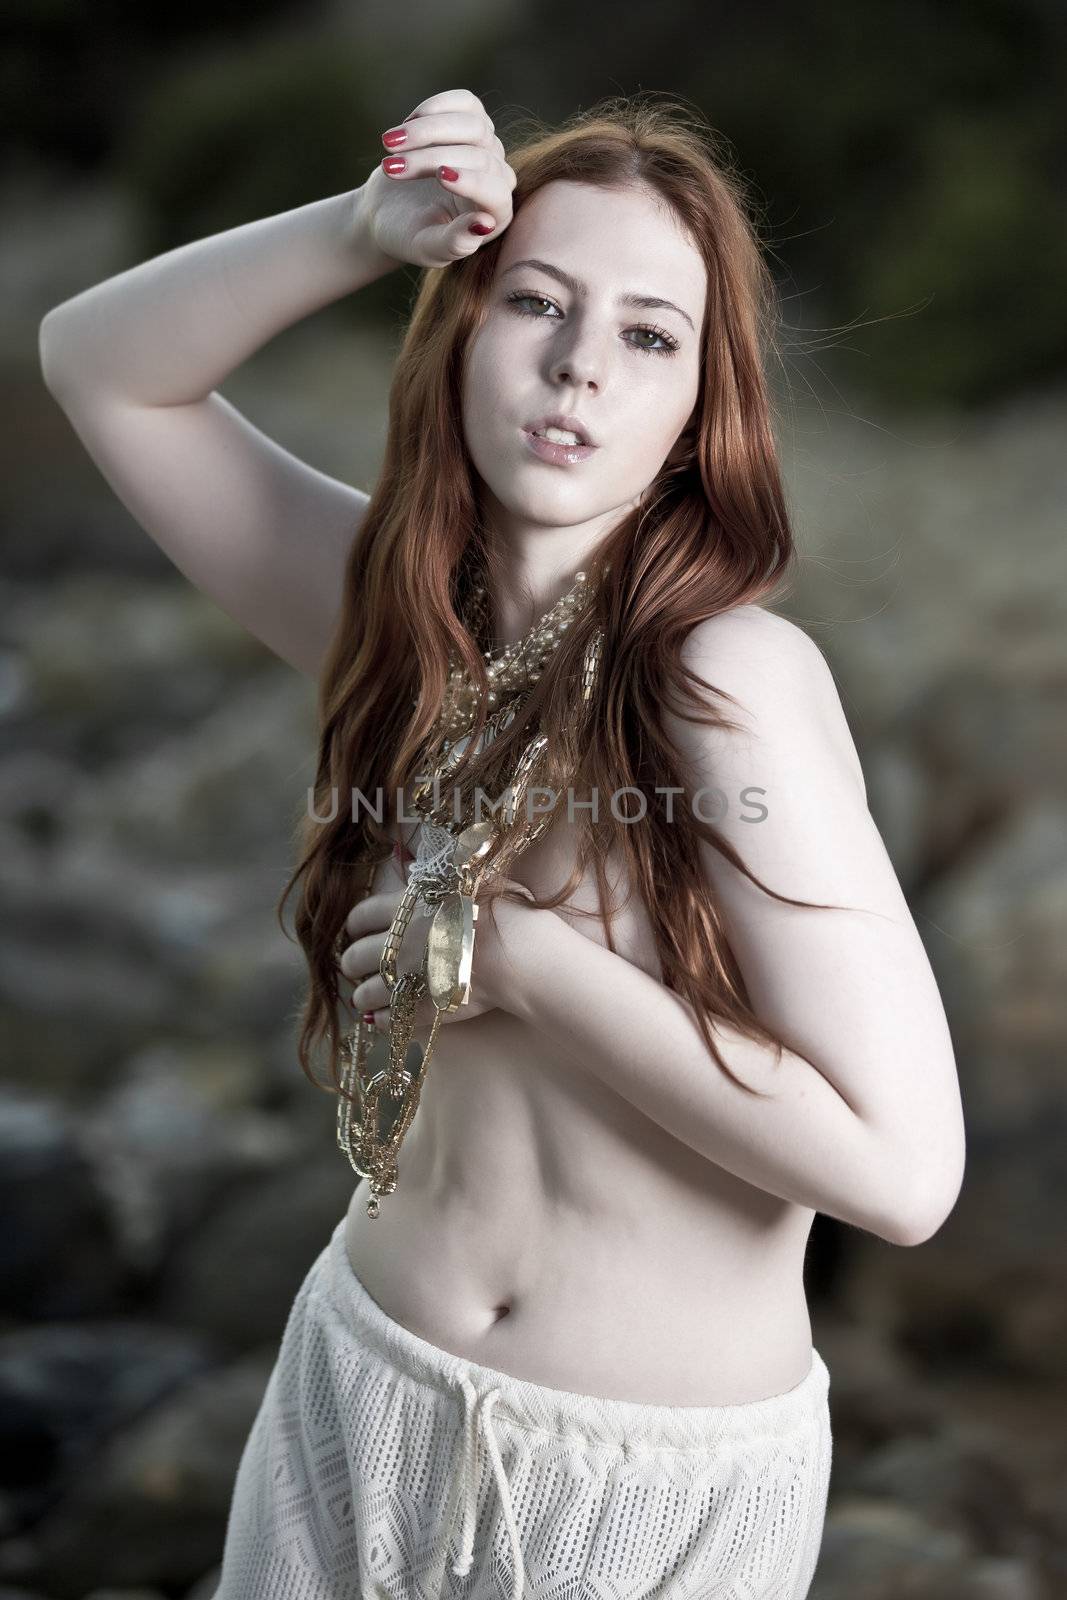 A semi-nude woman with beautiful white skin and long red hair outdoors on a beach